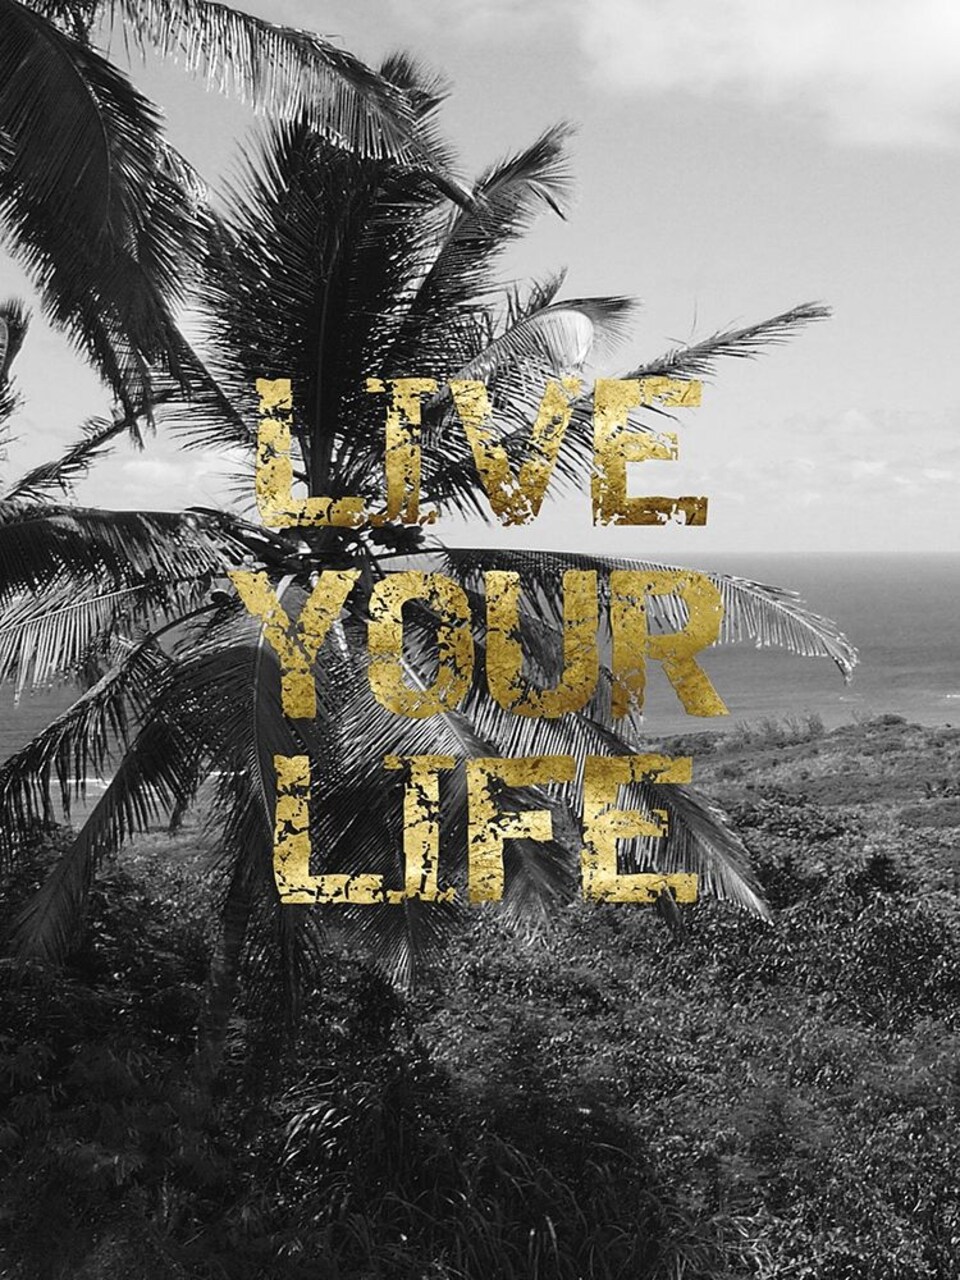 Live Your Life Poster Print by Sheldon Lewis - Item # VARPDXSLBRC283B